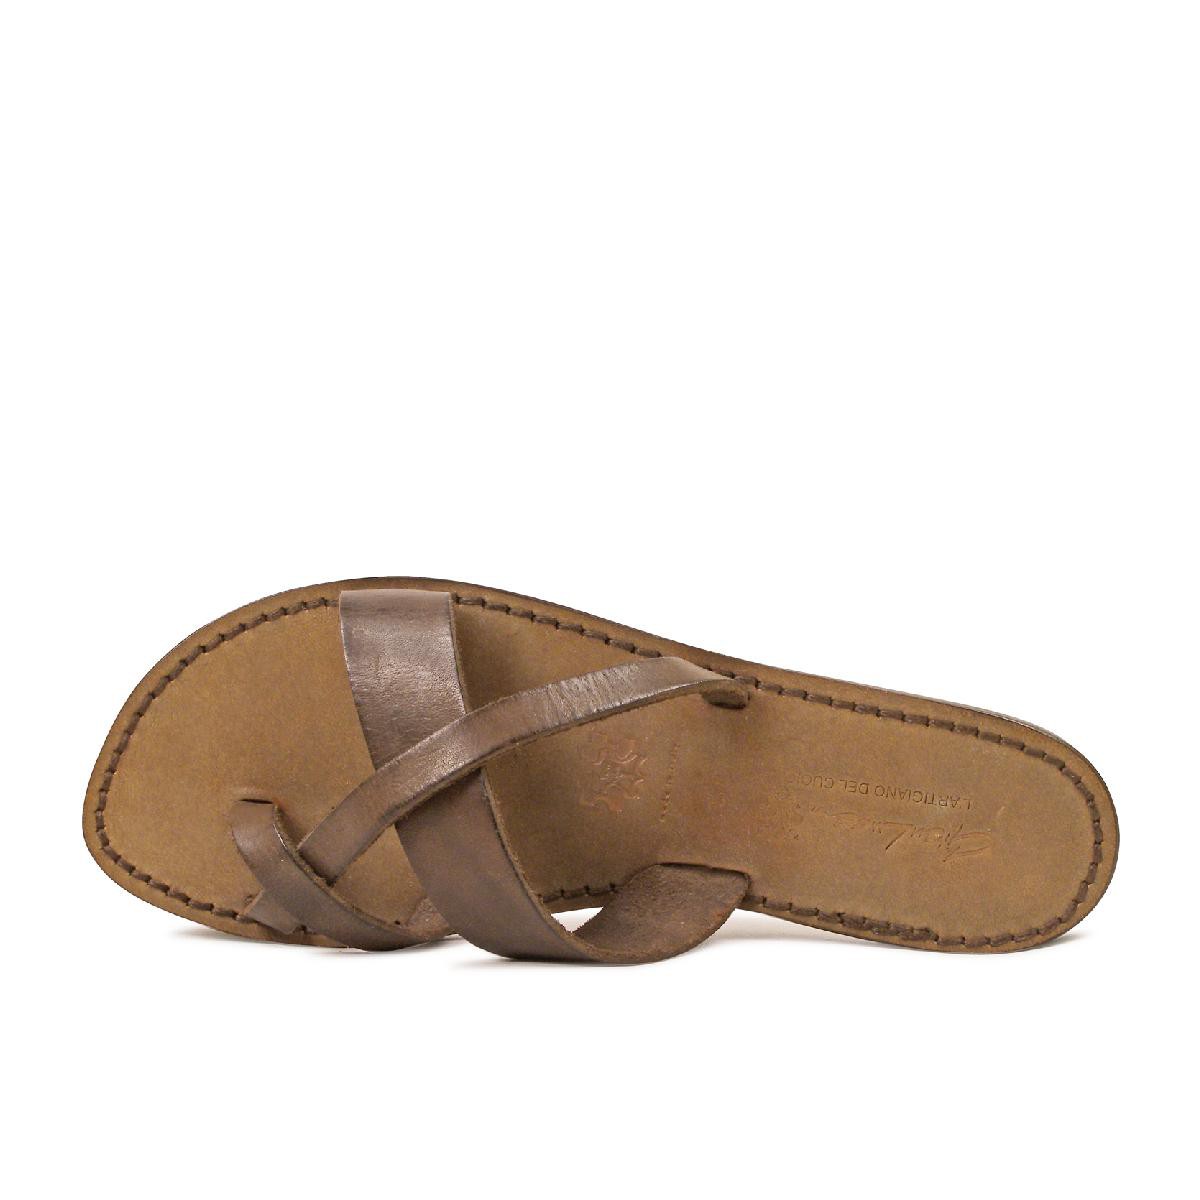 Women's leather thong sandals Handmade in Italy in mud cuir leather ...